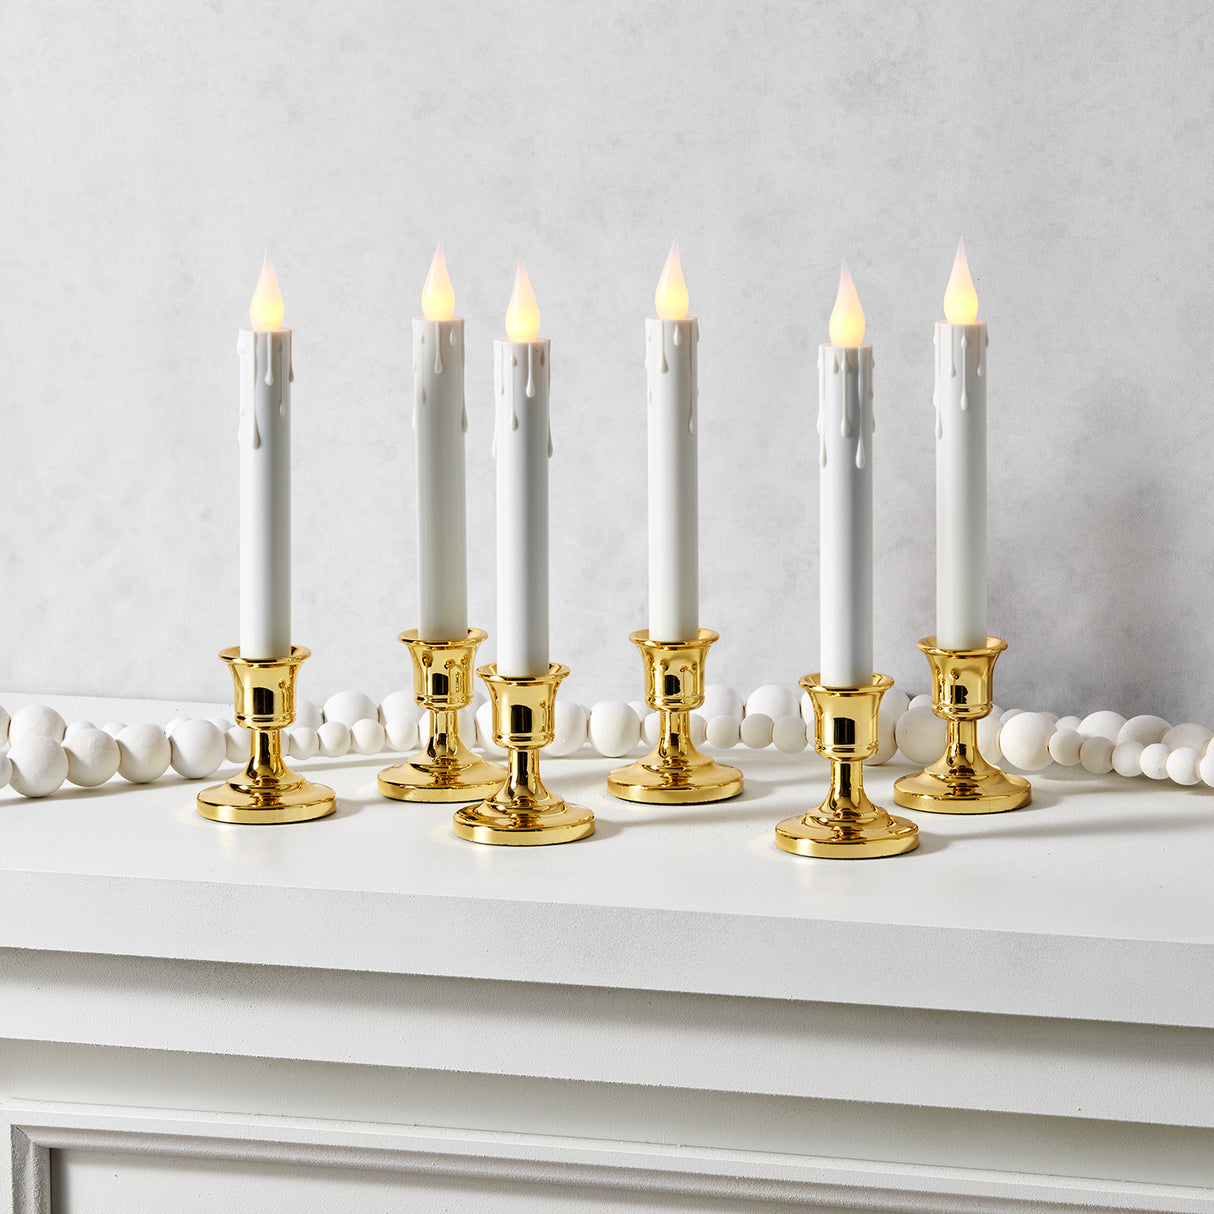 Ivy White Flameless Resin Window Candles with Removable Gold Bases, Set of 6